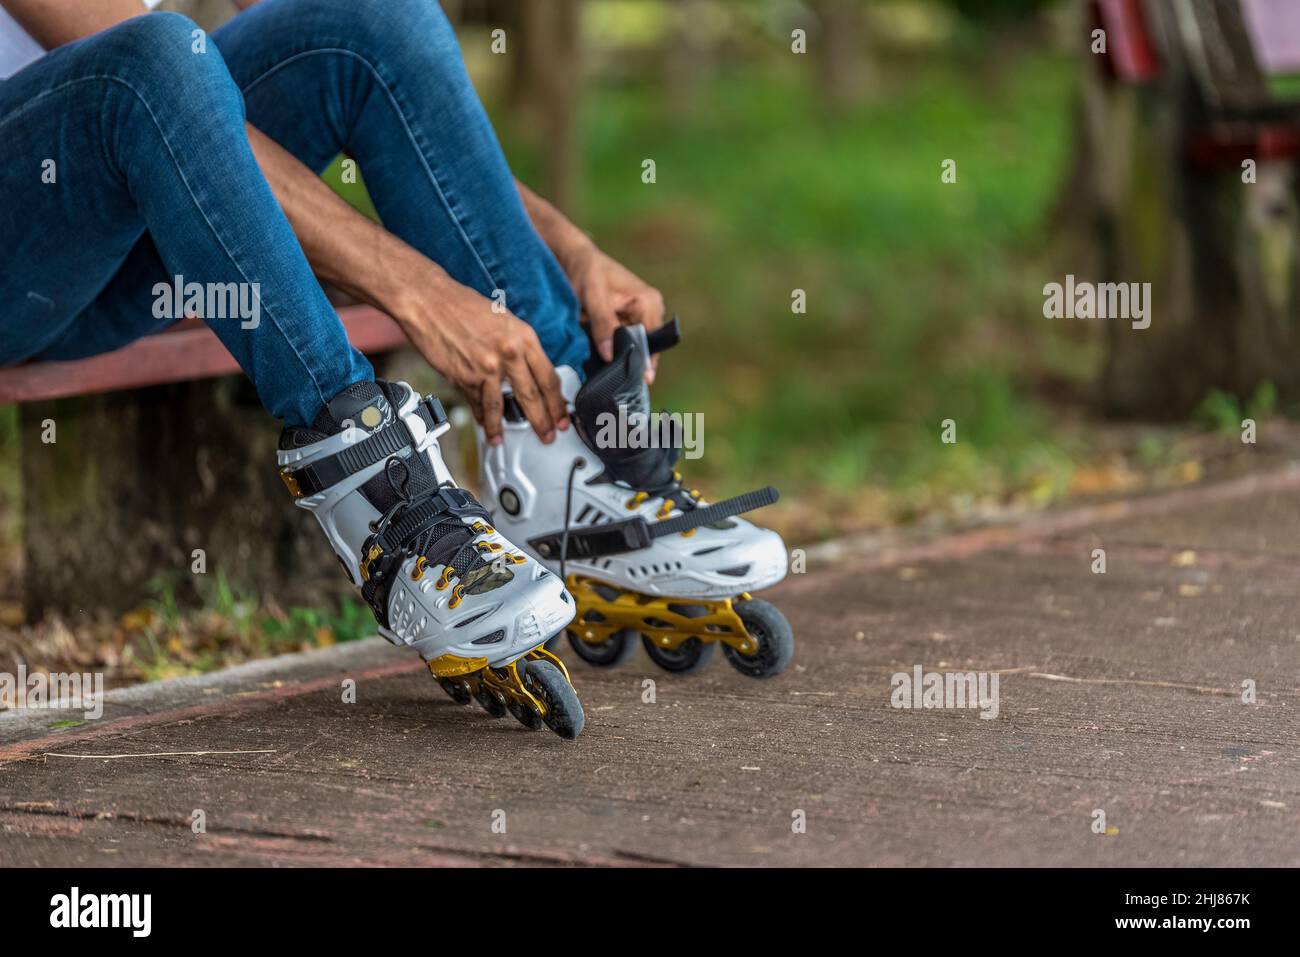 Close-up of young man putting on inline skates Banque D'Images